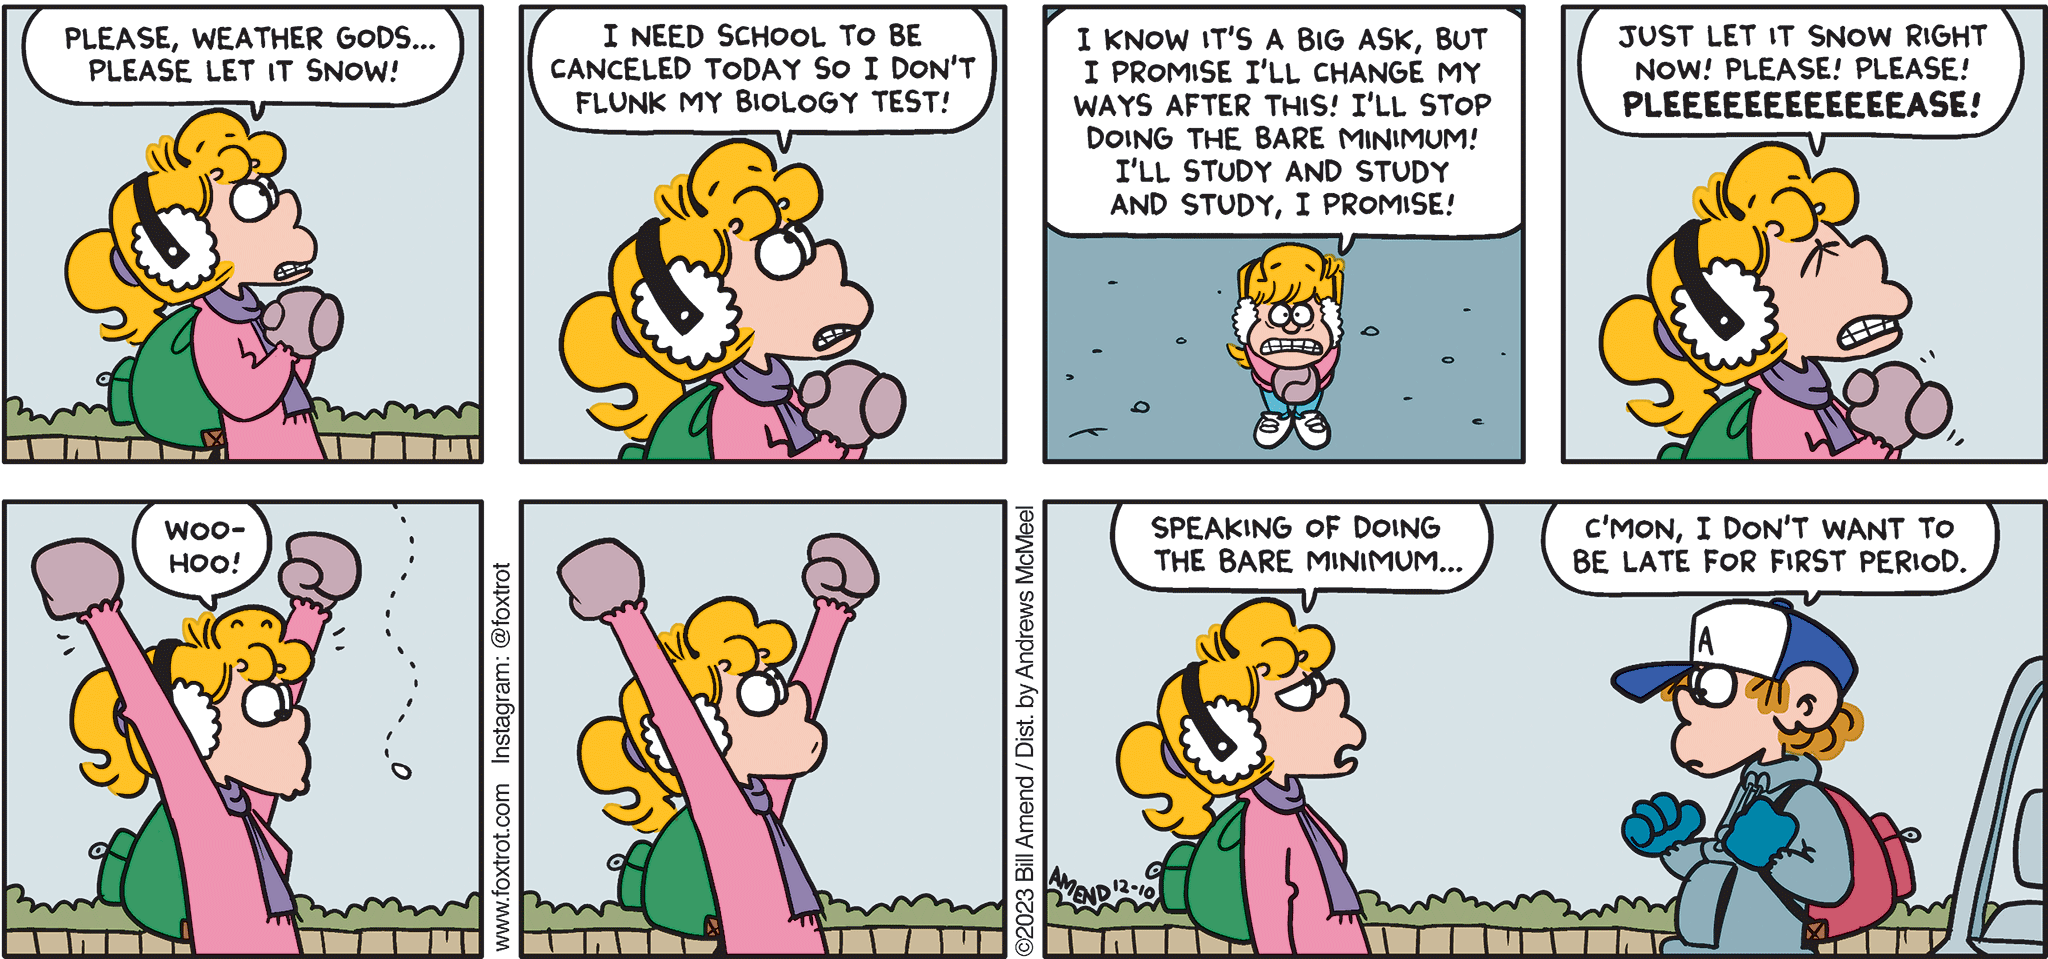 FoxTrot comic strip by Bill Amend - "Let It Snow" published December 10, 2023 - Transcript: Paige Fox: Please, Weather Gods... please let it snow! I need school to be canceled today so I don't flunk my biology test! I know it's a big ask, but I promise I'll change my ways after this! I'll stop doing the bare minimum! I'll study and study and study, I promise! Just let it snow right now! Please! Please! PLEEEEEEEEEASE! Woohoo! Speaking of doing the bare minimum... Peter Fox: C'mon, I don't want to be late for first period. 